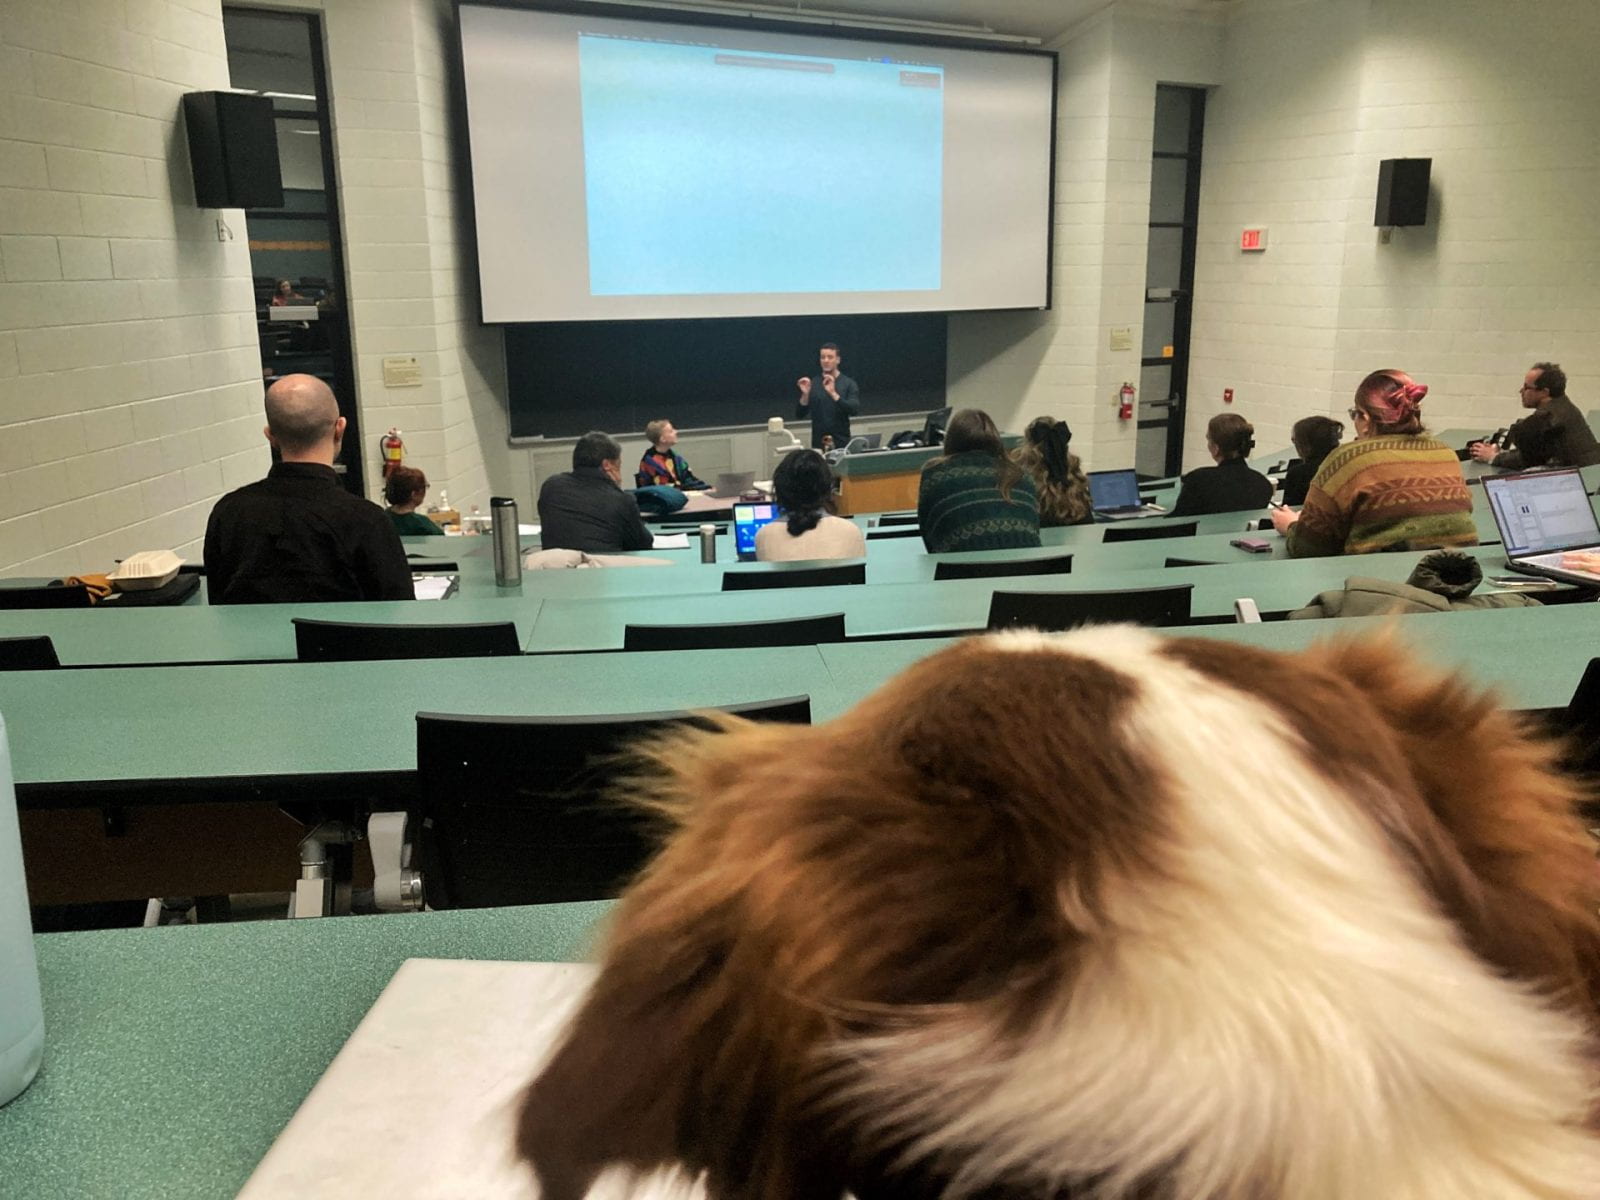 Image of Zero, a service dog, avidly listening to Dr Bob Fischer's seminar